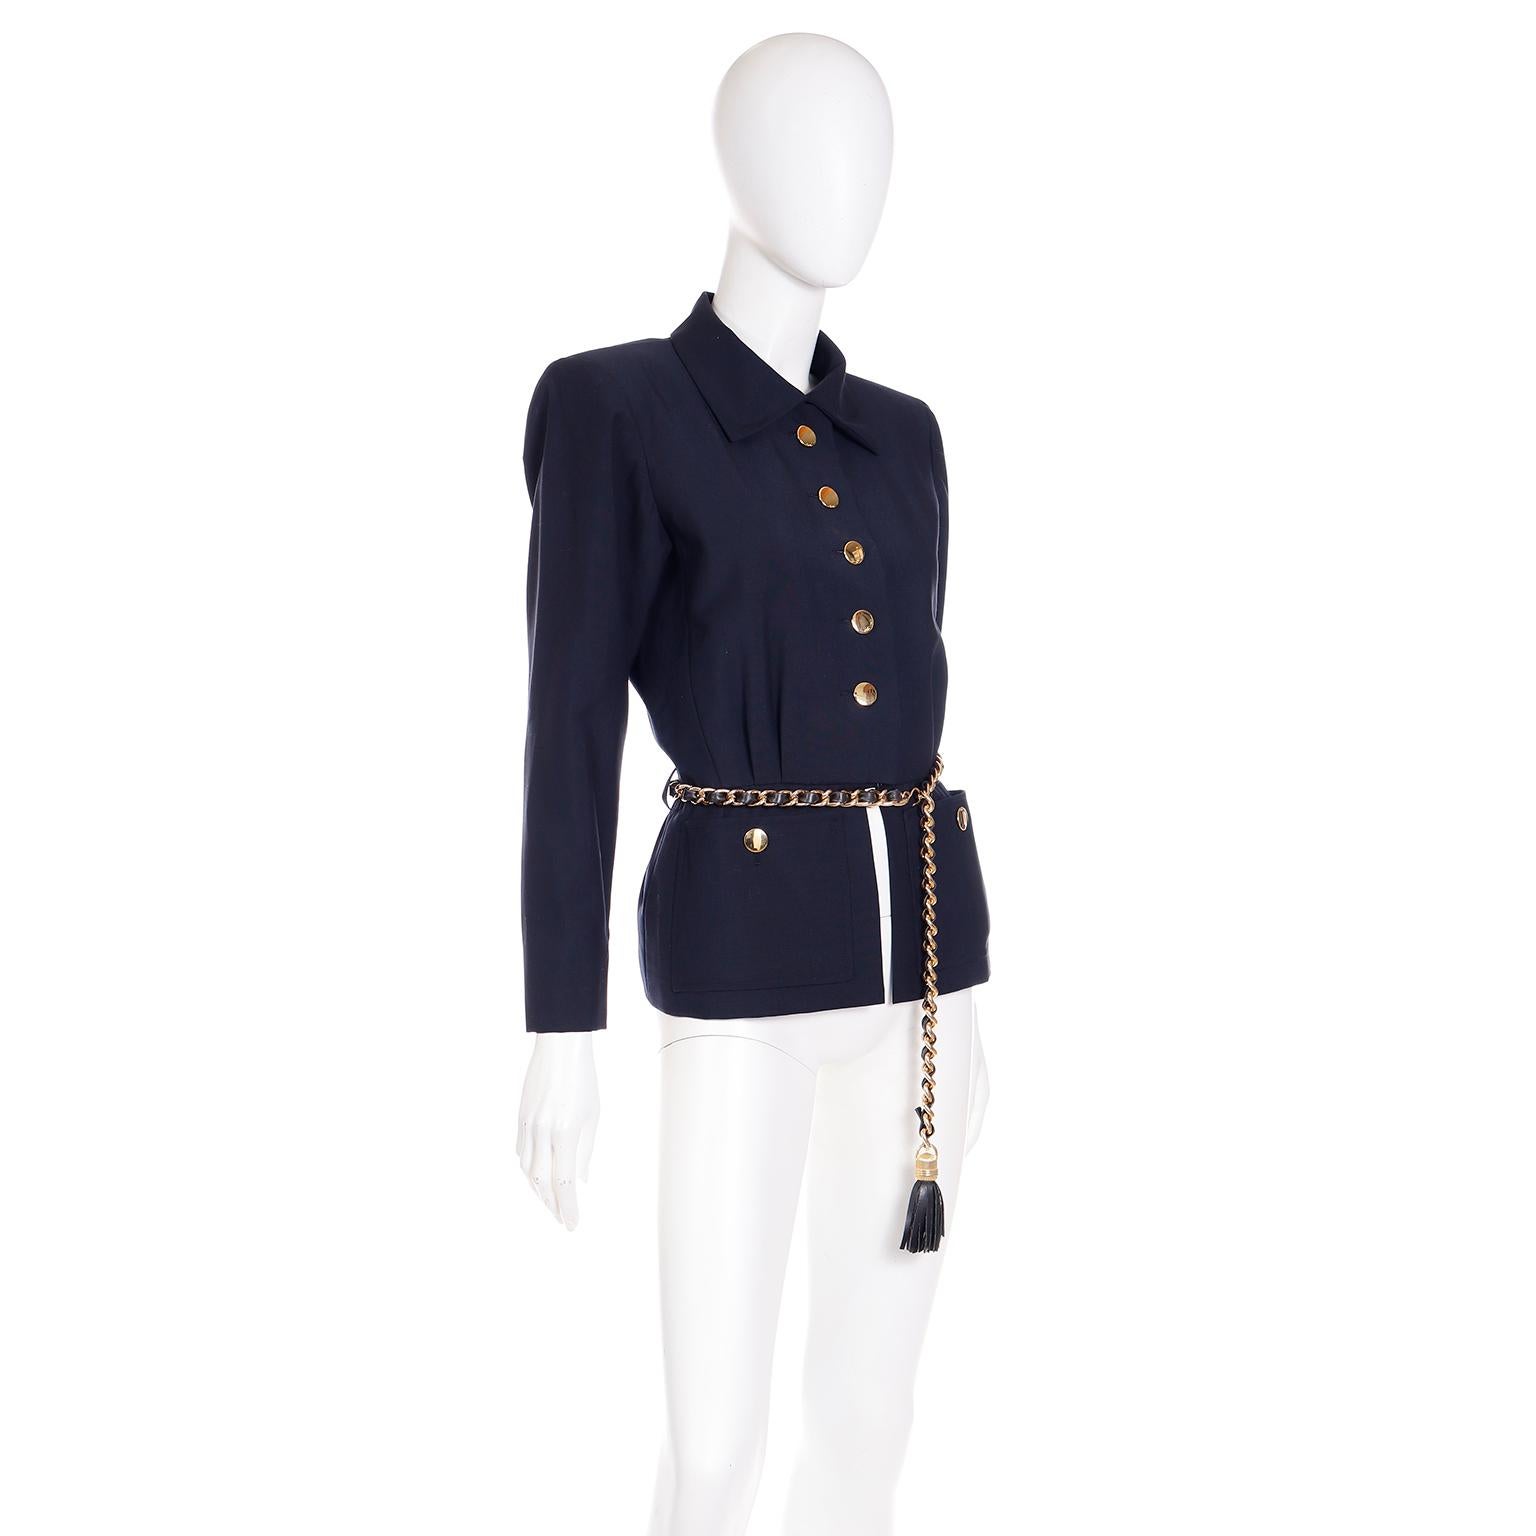 This chic vintage Yves Saint Laurent jacket is in a luxe navy blue wool and mohair blend. This Spring/Summer 1987 YSL jacket has pretty round gold metal button closures down the center front and a pointed collar. We love the split seam below the